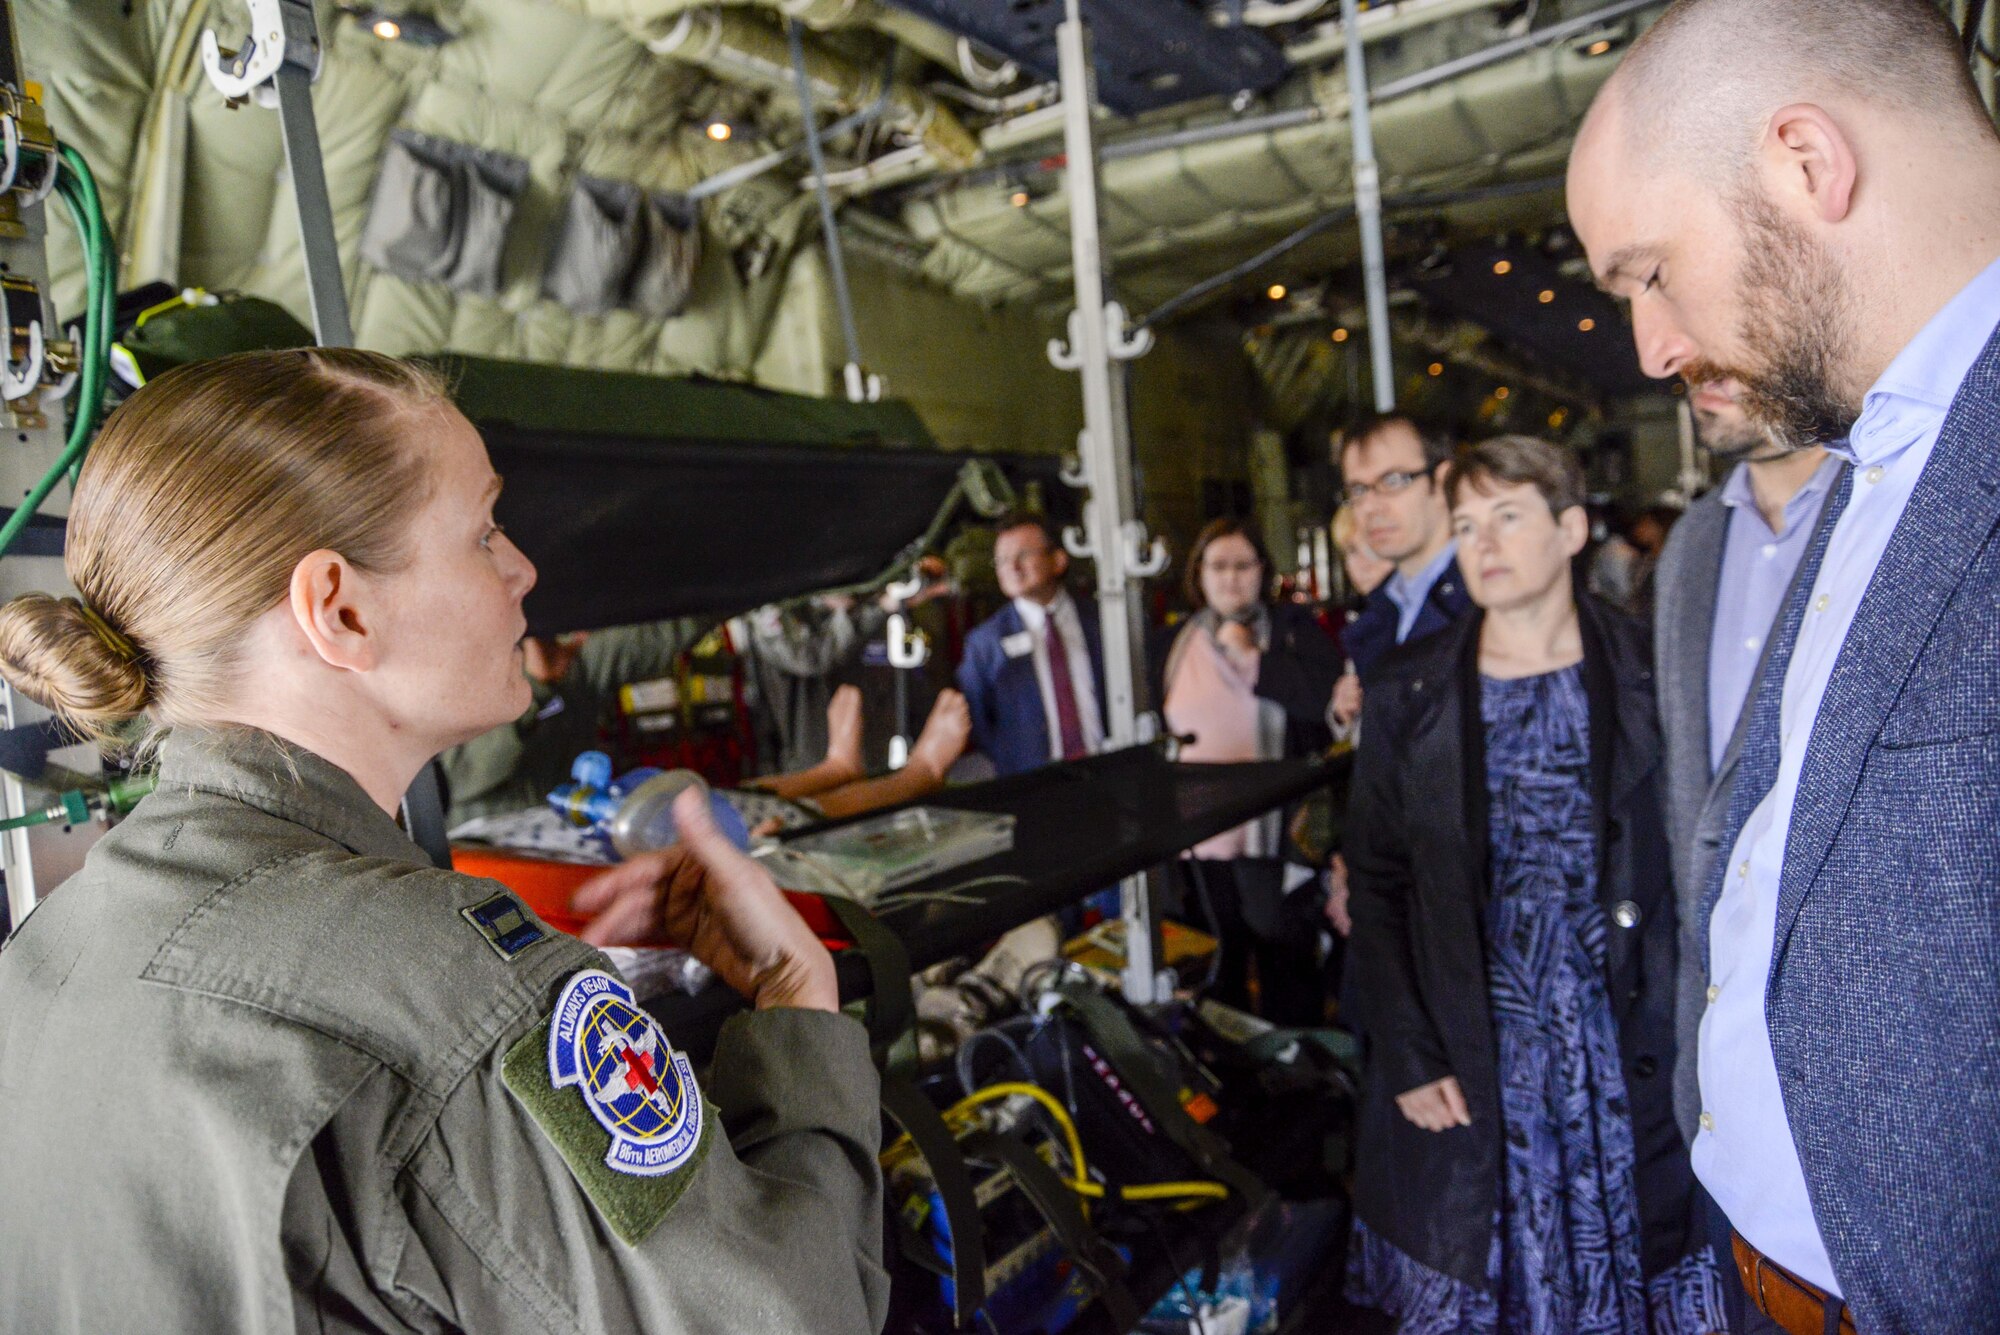 Capt. Tracy Davis, 86th Aeromedical Evacuation Squadron flight nurse, answers questions from local national medical providers during a tour on Ramstein Air Base, Germany, April 27, 2017. The biennial tour is designed to show medical providers from the Kaiserslautern Military Community the services the 86th AES and 86th Medical Group provide. It also aims to solidify the partnership between military and local civilian medical providers, who often take care of military members and their families when military facilities are unable to provide adequate medical care. (U.S. Air Force photo/Staff Sgt. Timothy Moore)